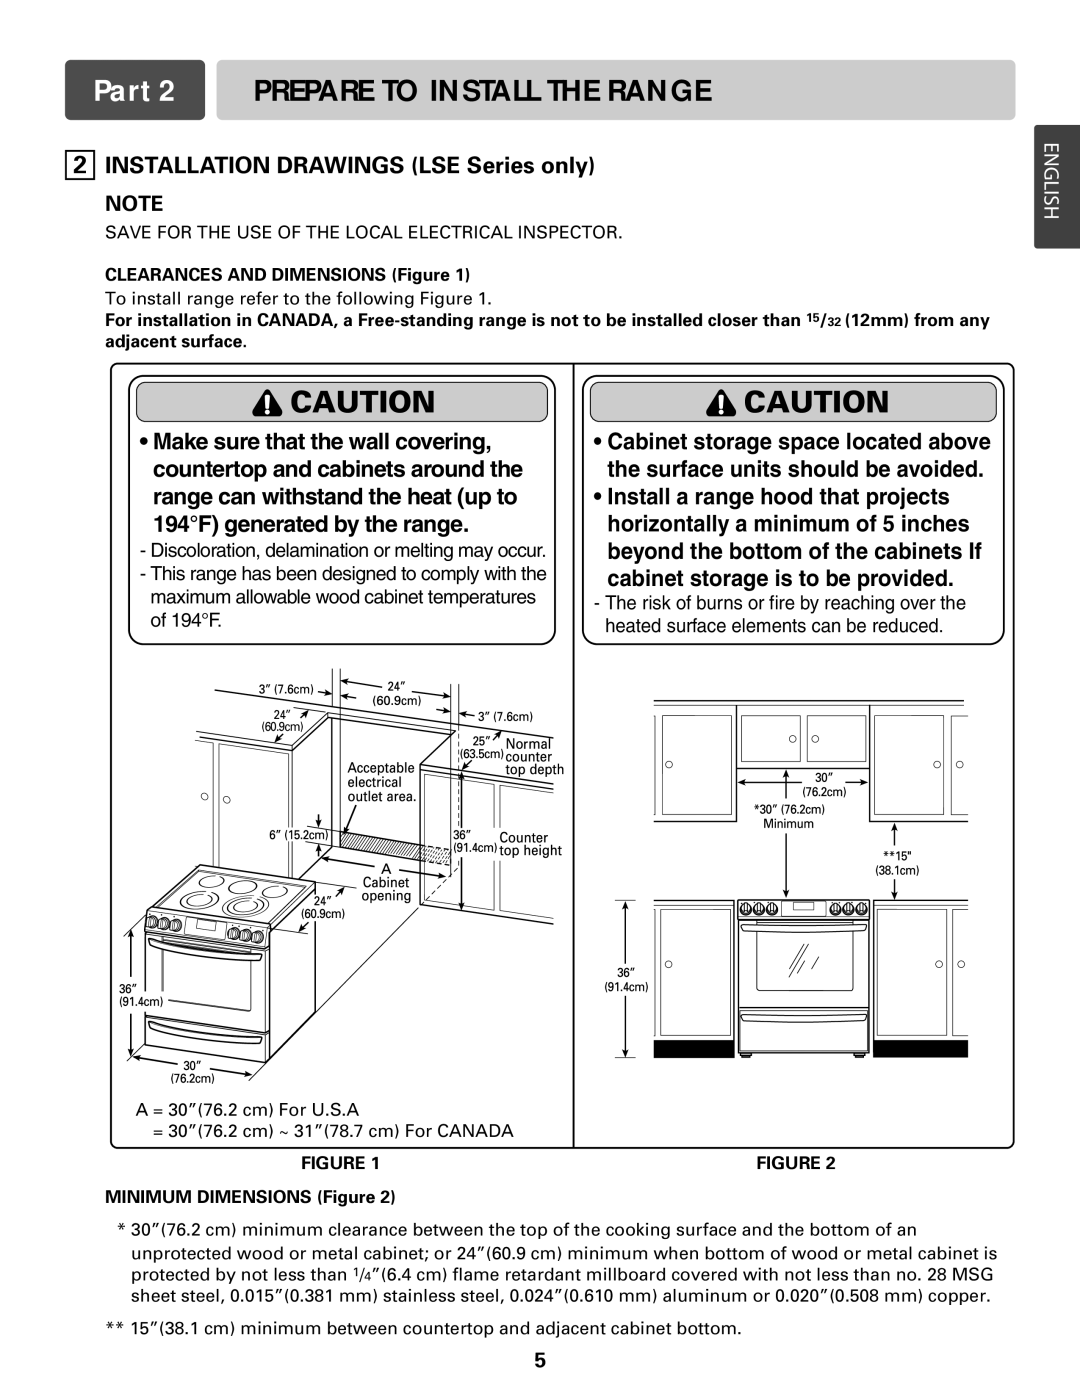 LG Electronics LRE30451S INSTALLATION DRAWINGS LSE Series only, Part 2 PREPARE TO INSTALL THE RANGE, Caution Caution 